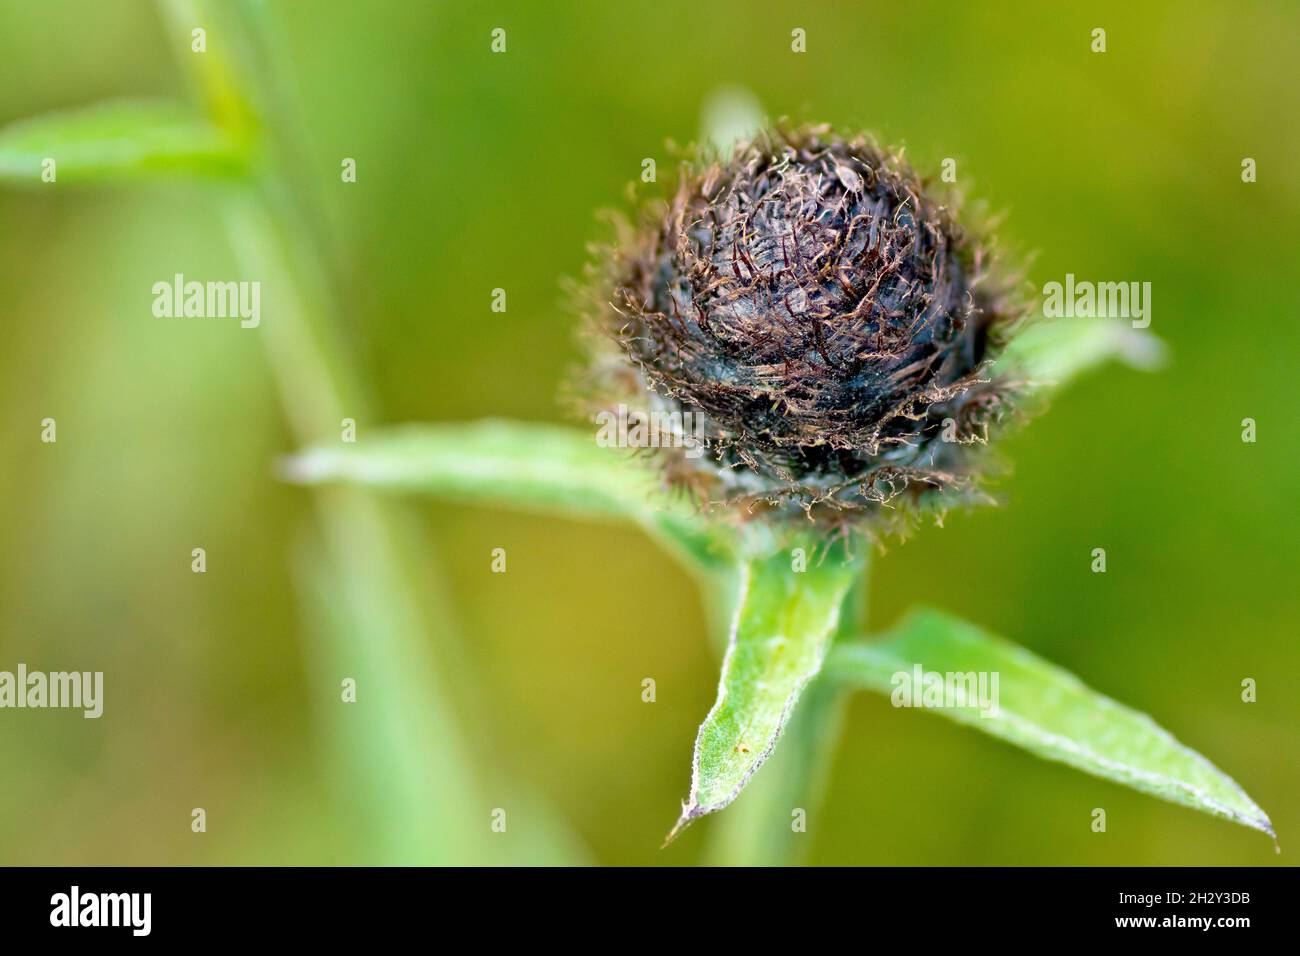 Lesser Knapweed (centaurea nigra), also known as Hardheads, close up of a solitary closed flower bud isolated against an out of focus background. Stock Photo